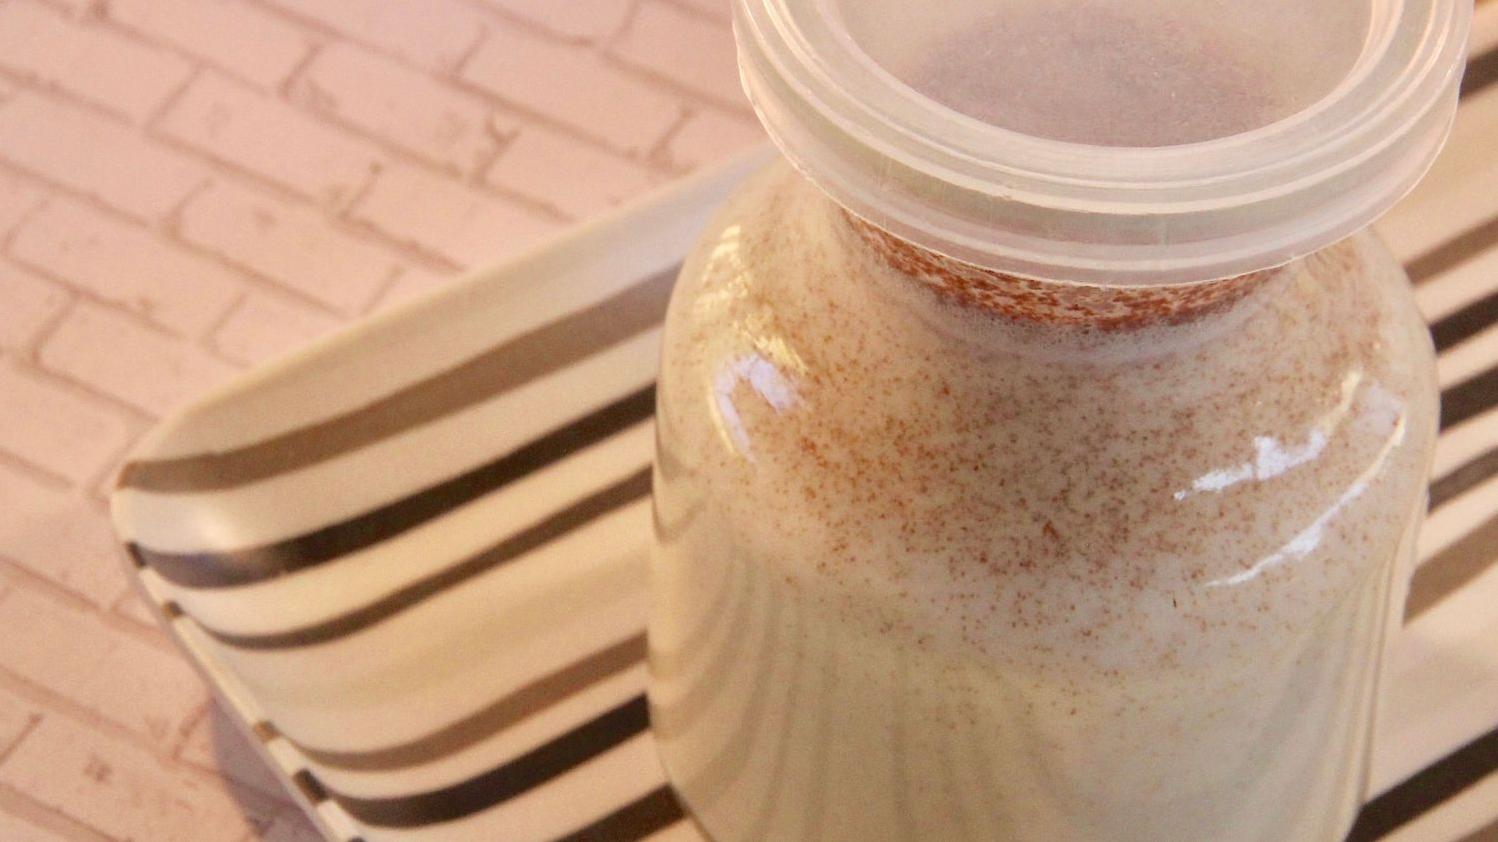  Satisfy your sweet tooth with this homemade coffee creamer!